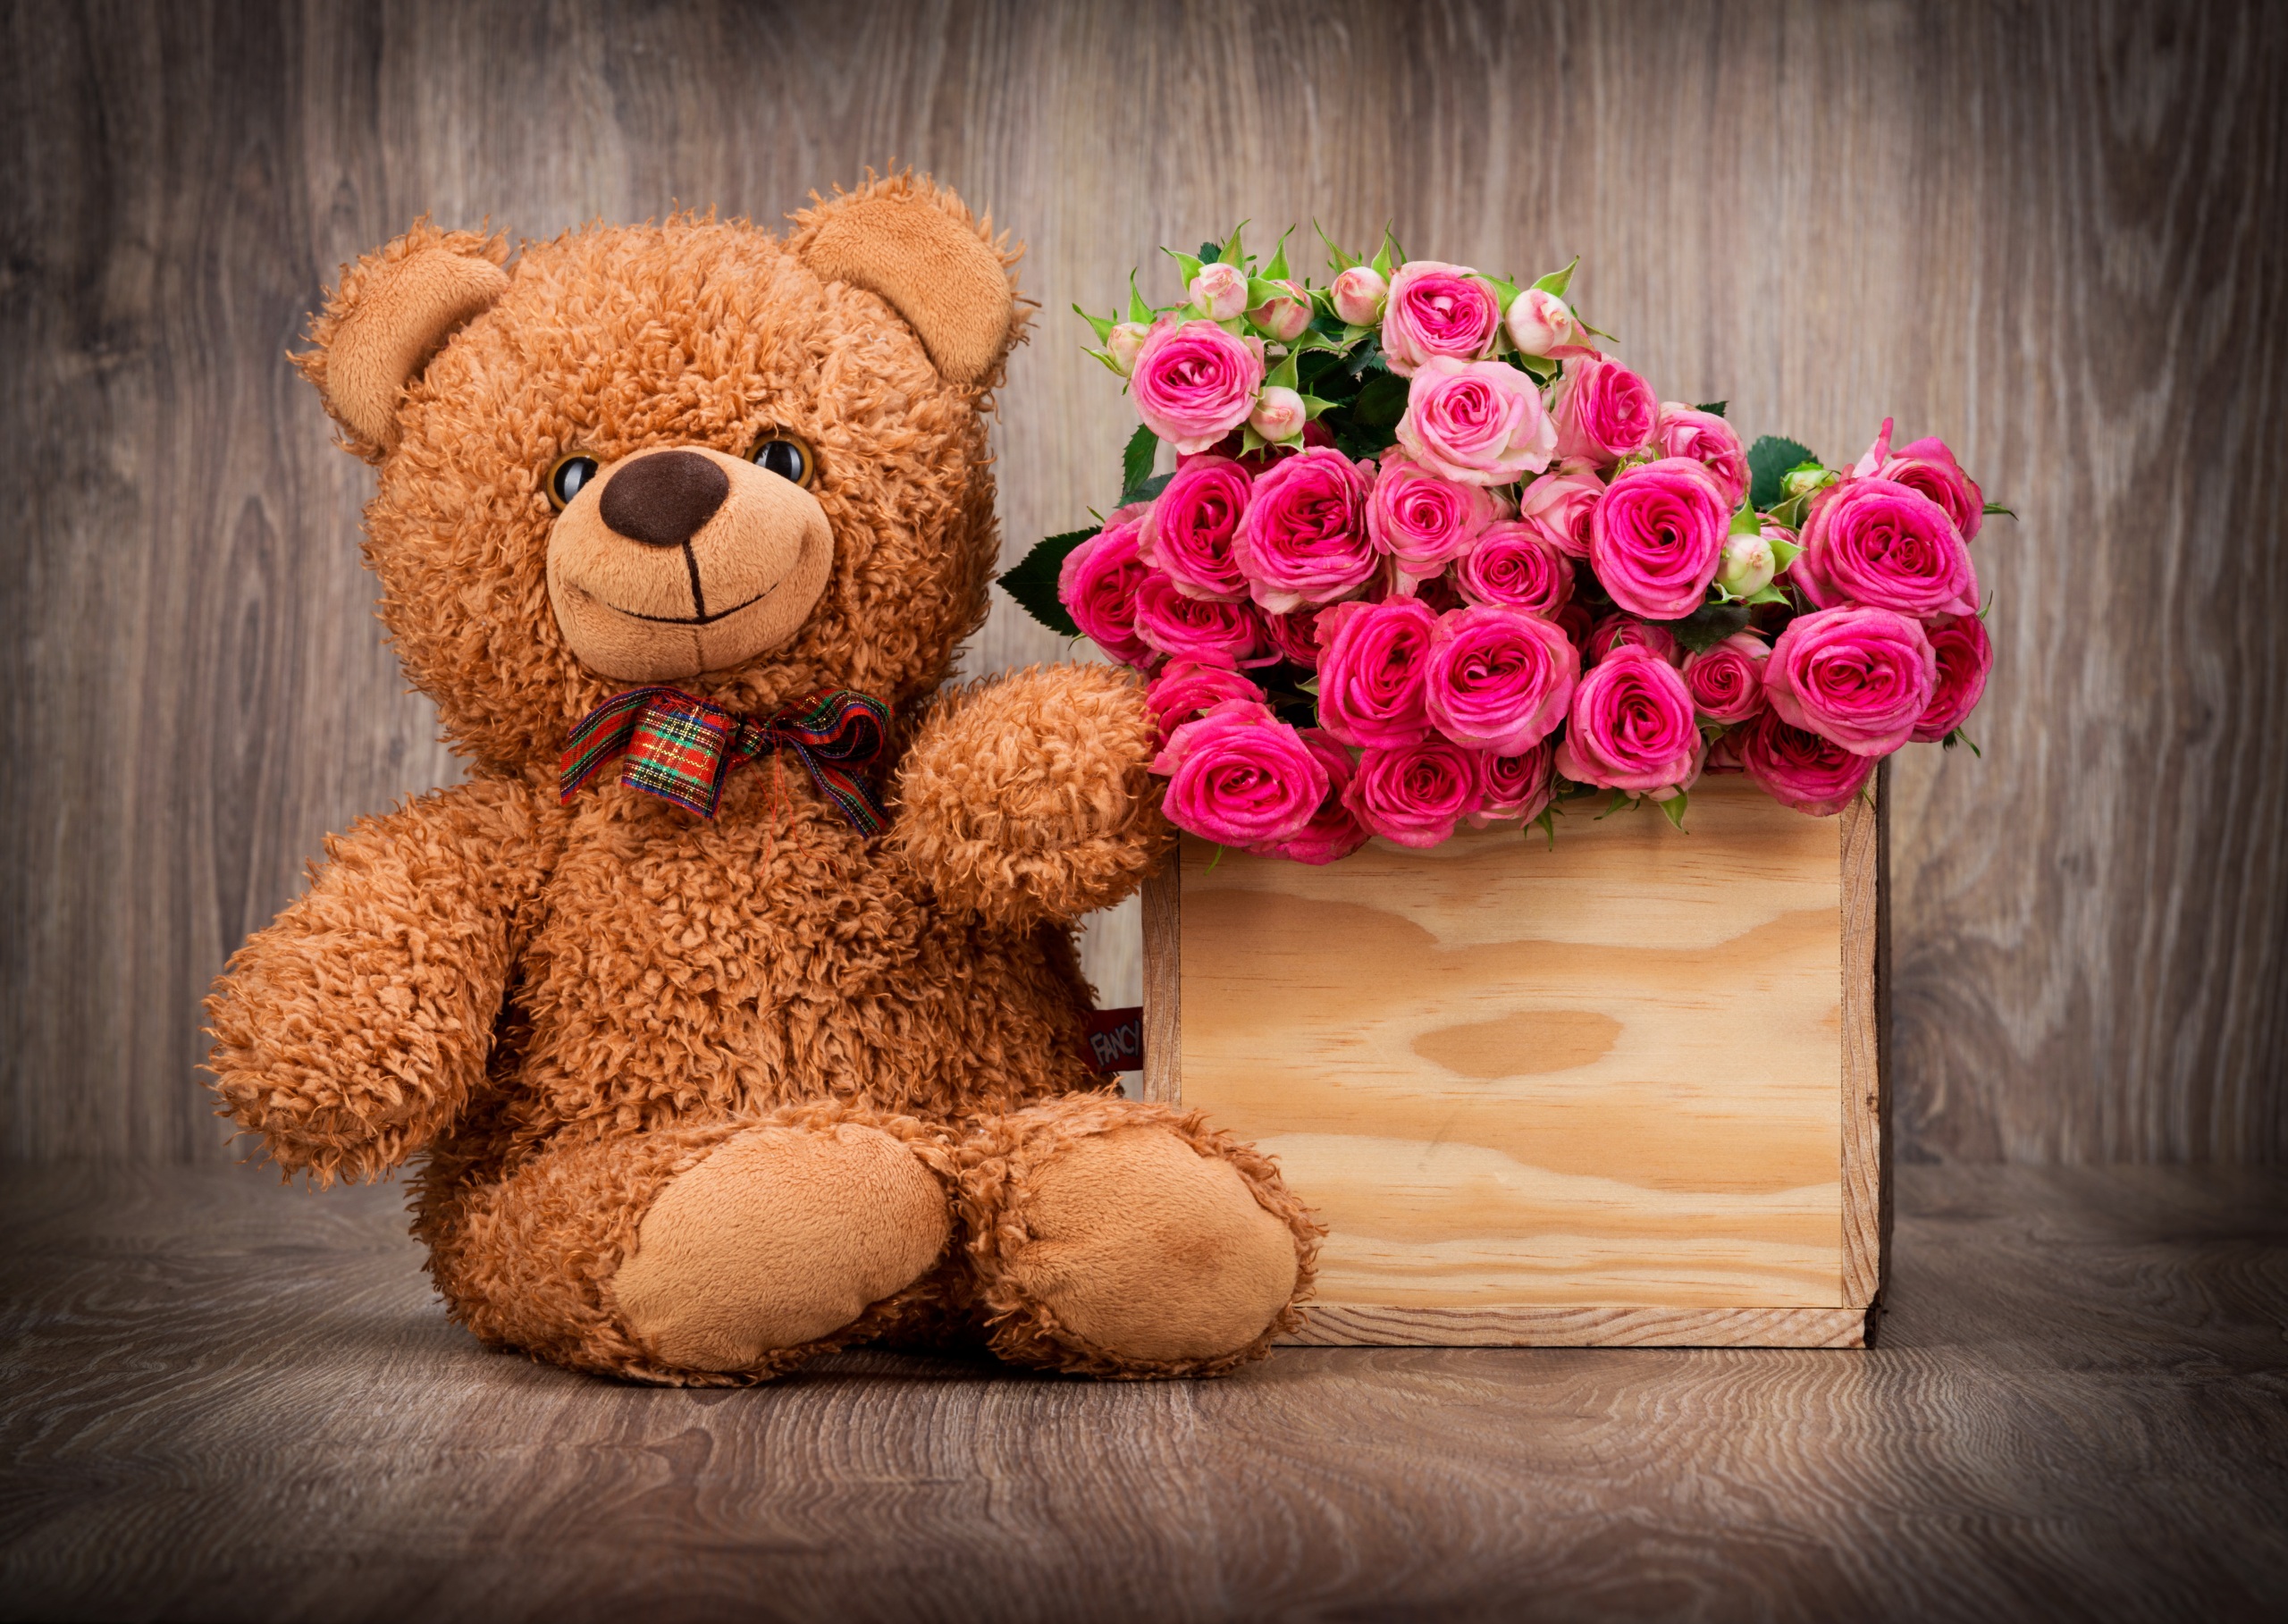 Cute Teddy Bear Wallpaper with Pink Roses in Box | HD Wallpapers